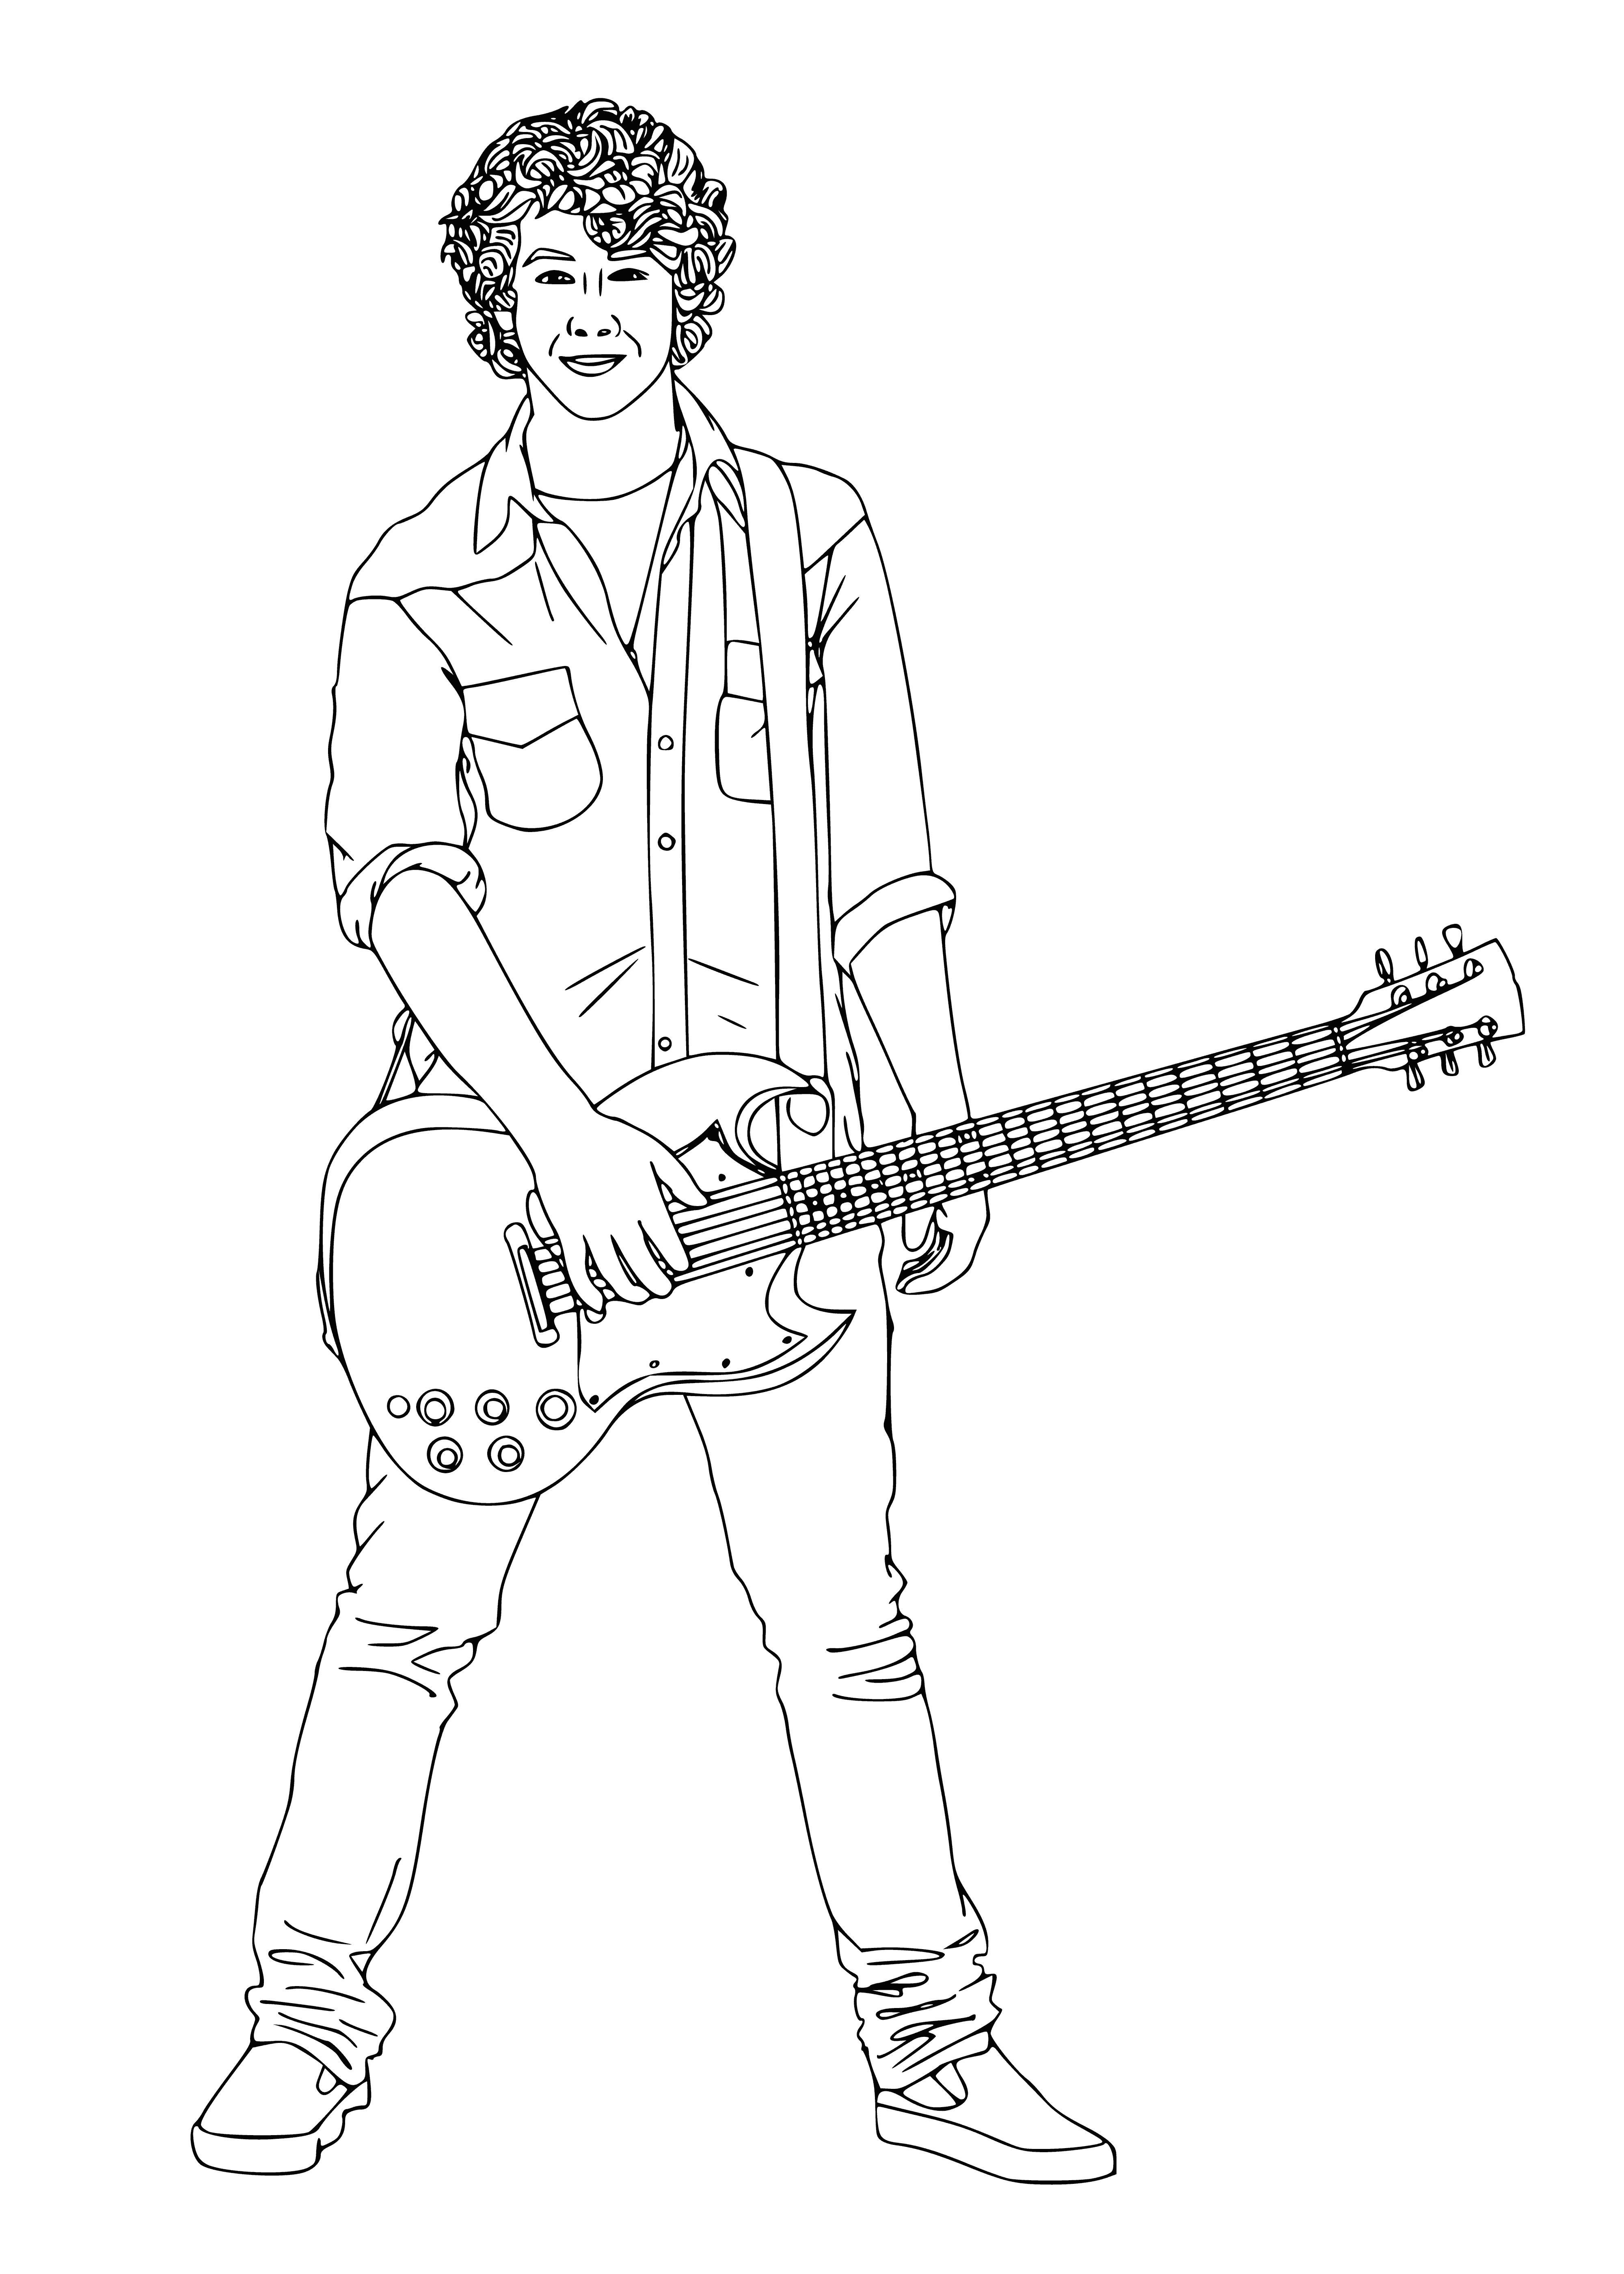 guitar player coloring page